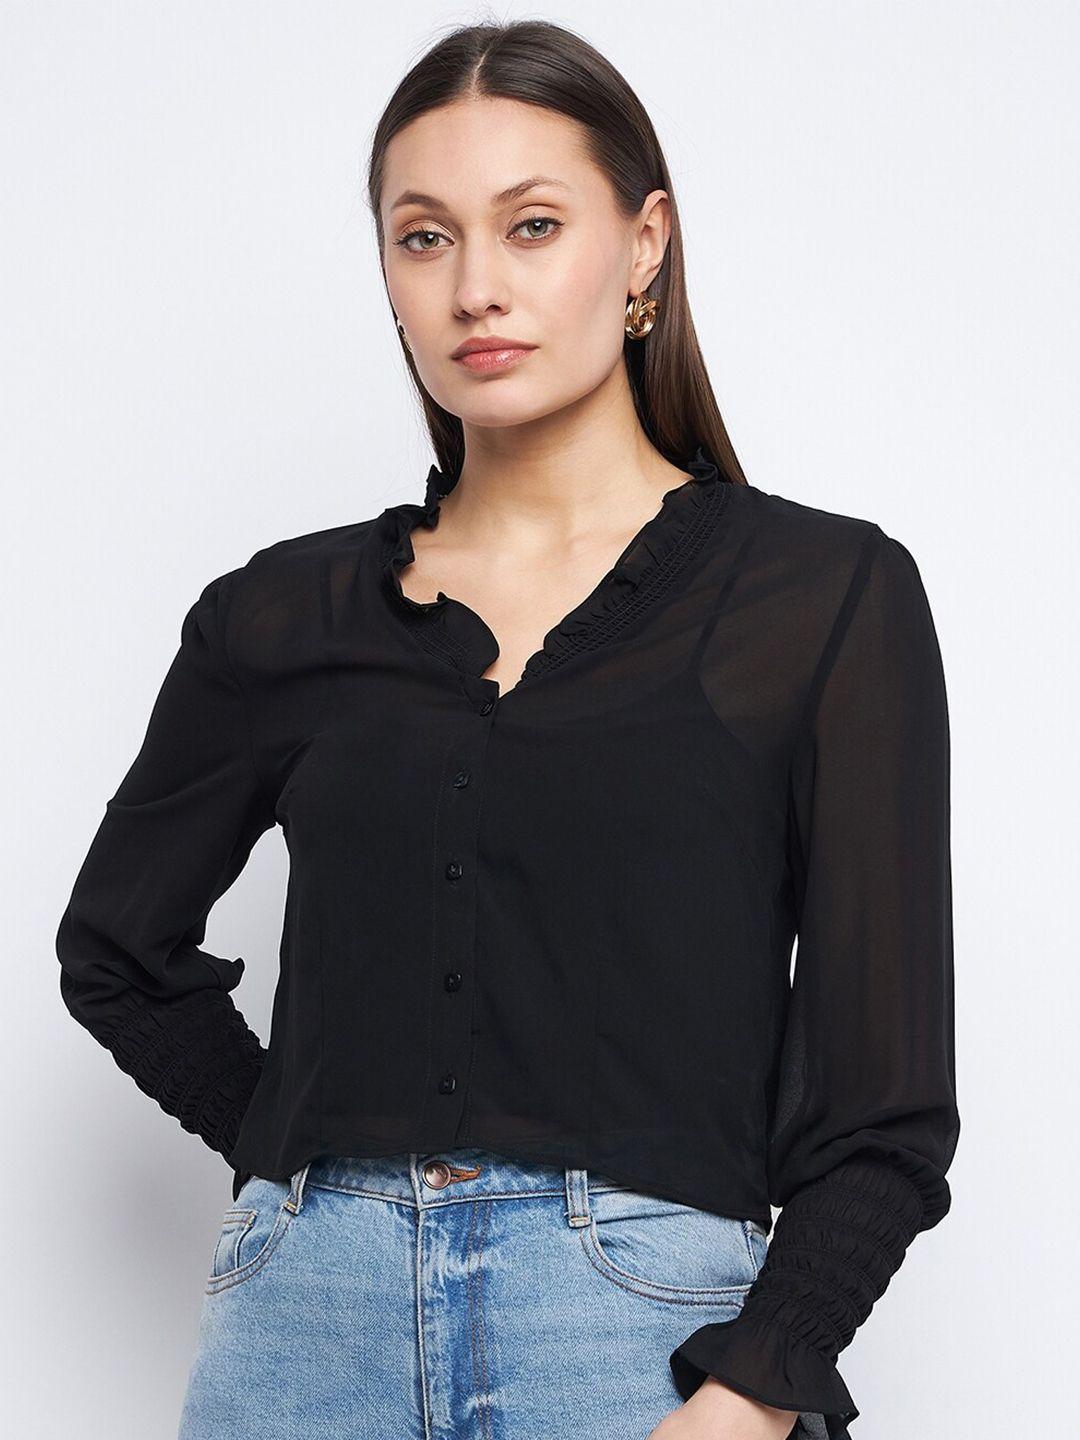 madame v-neck cuffed sleeves ruffles detail shirt style top